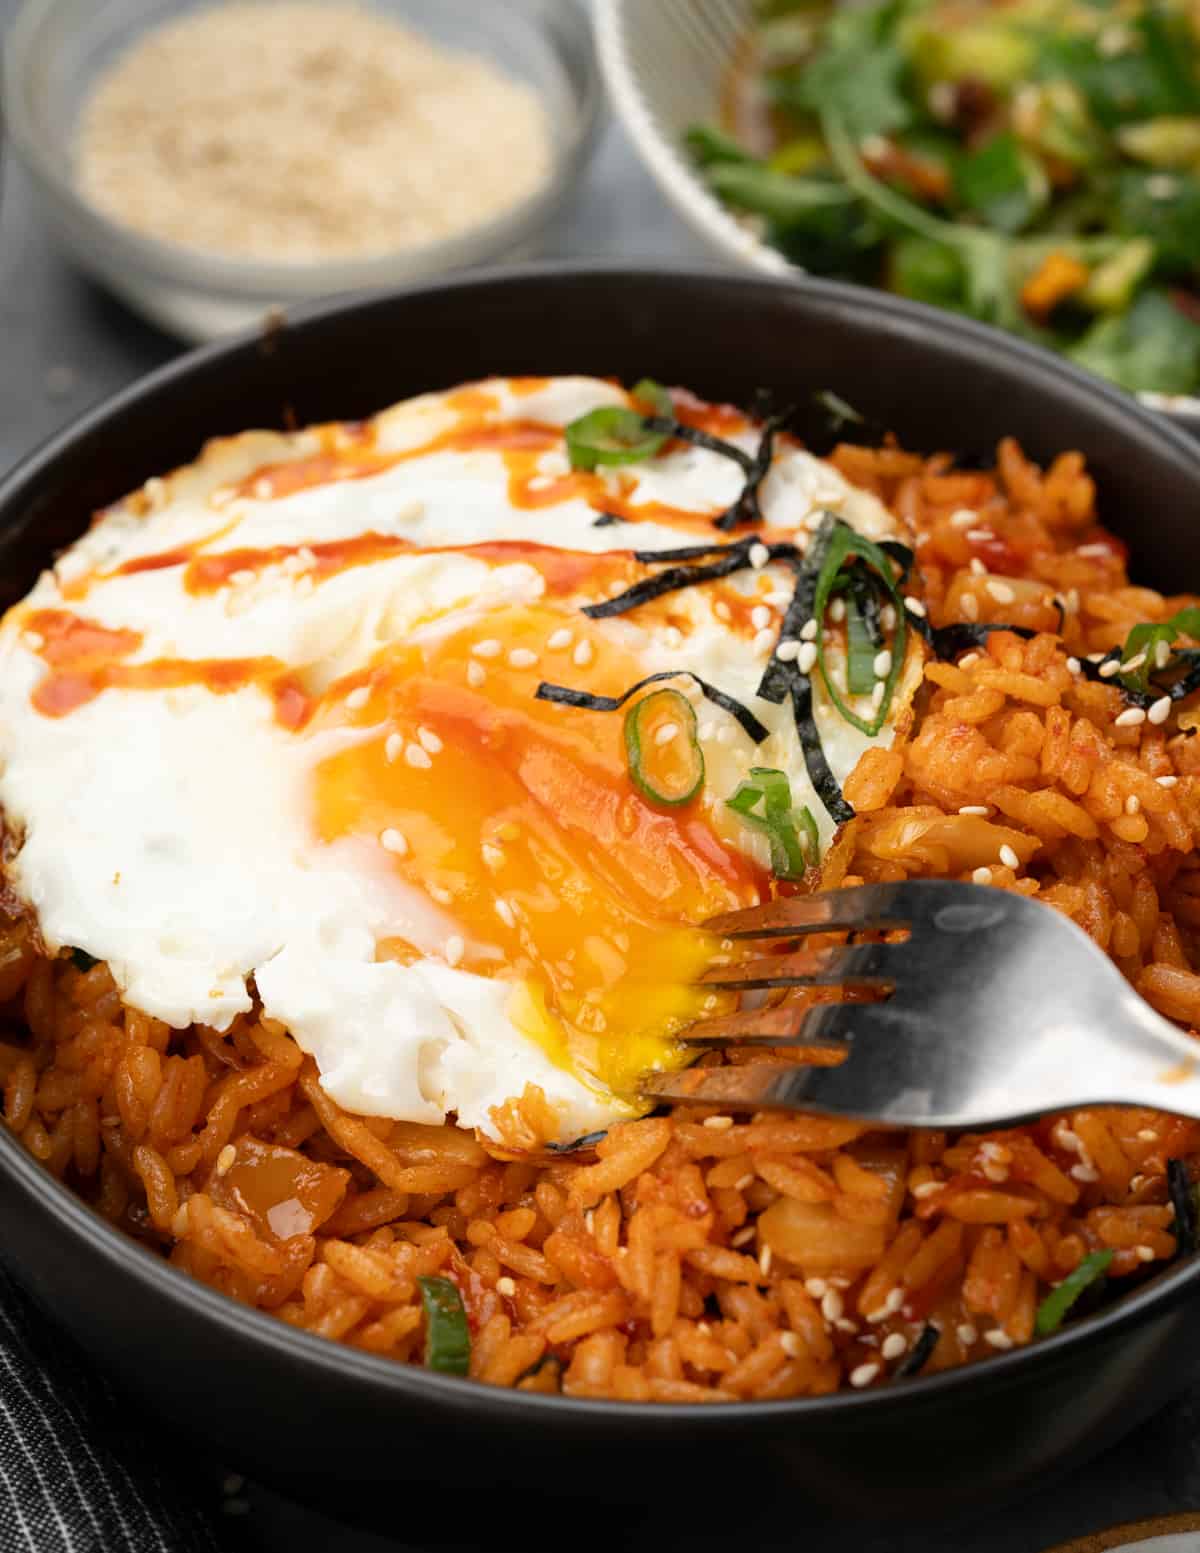 Kimchi fried rice topped with crispy sunny side up, seaweed strips, green onion and sesame seeds.